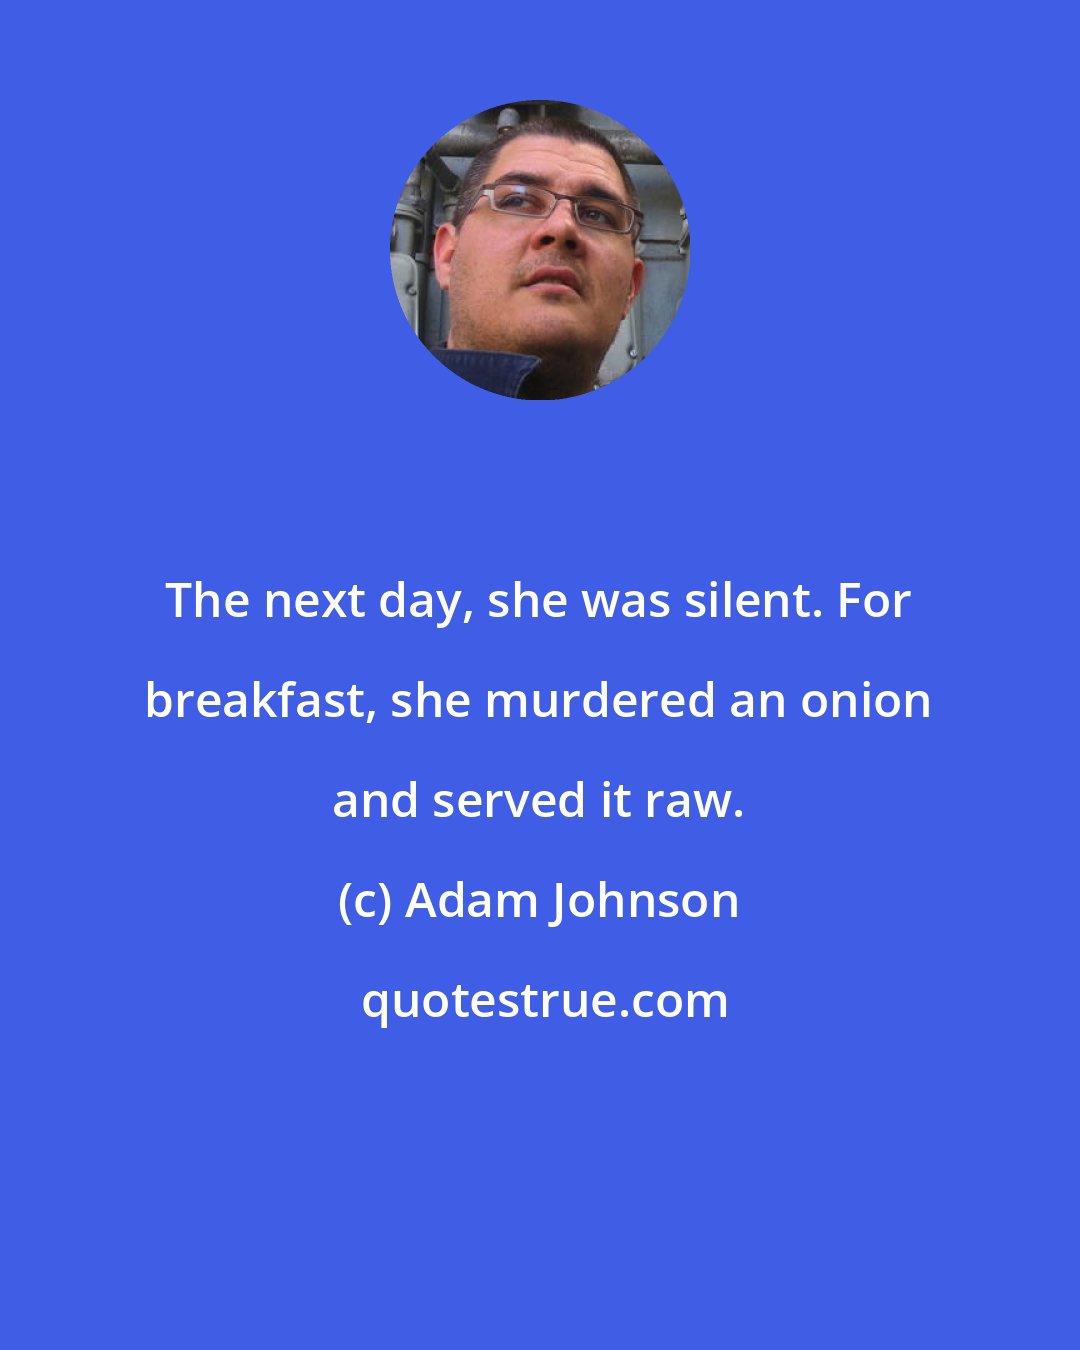 Adam Johnson: The next day, she was silent. For breakfast, she murdered an onion and served it raw.